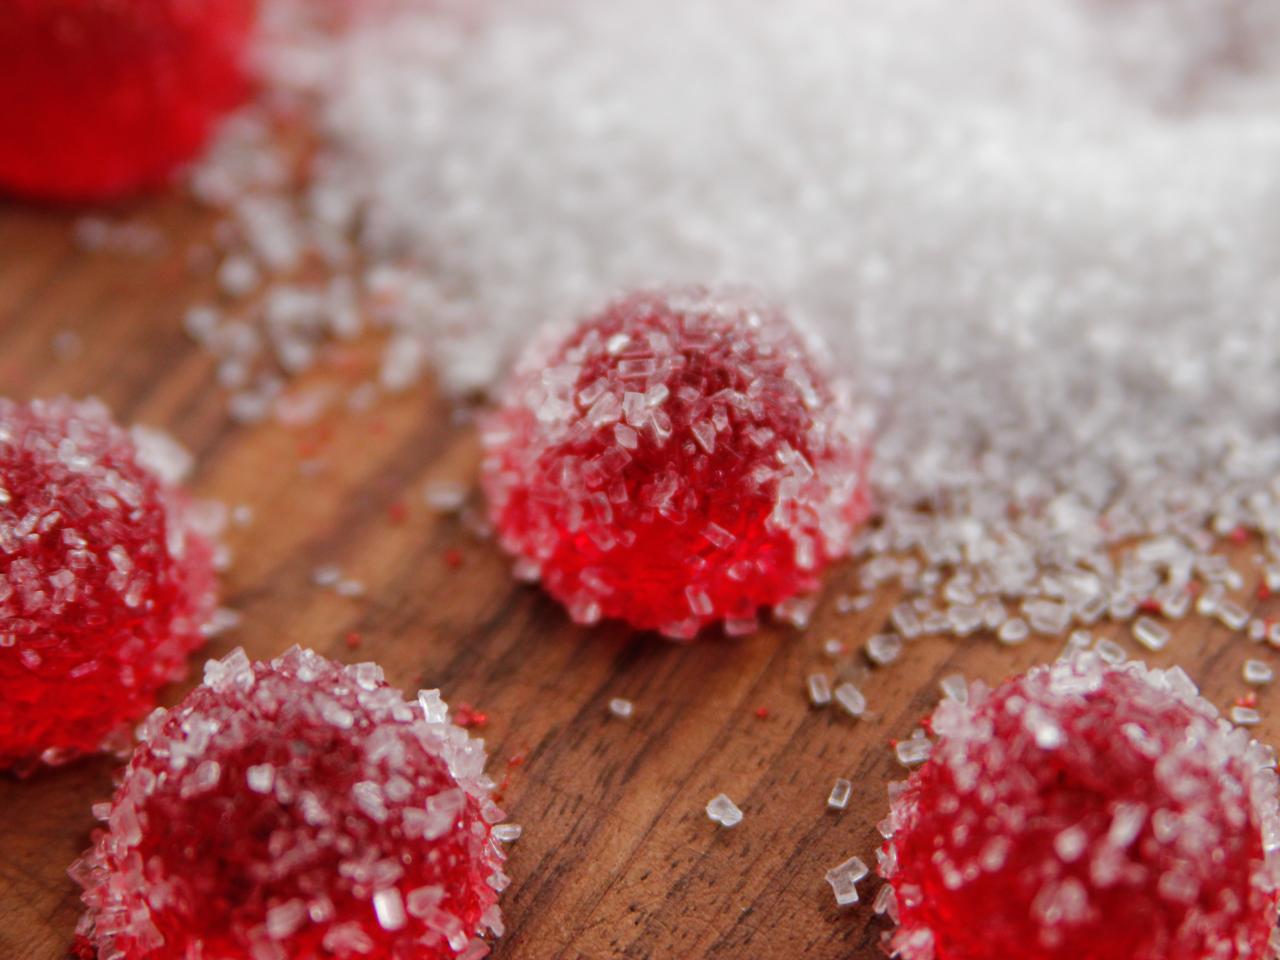 10 Easy Homemade Candies That Make Great Last-Minute Gifts | FN Dish - Behind-the-Scenes, Food ...